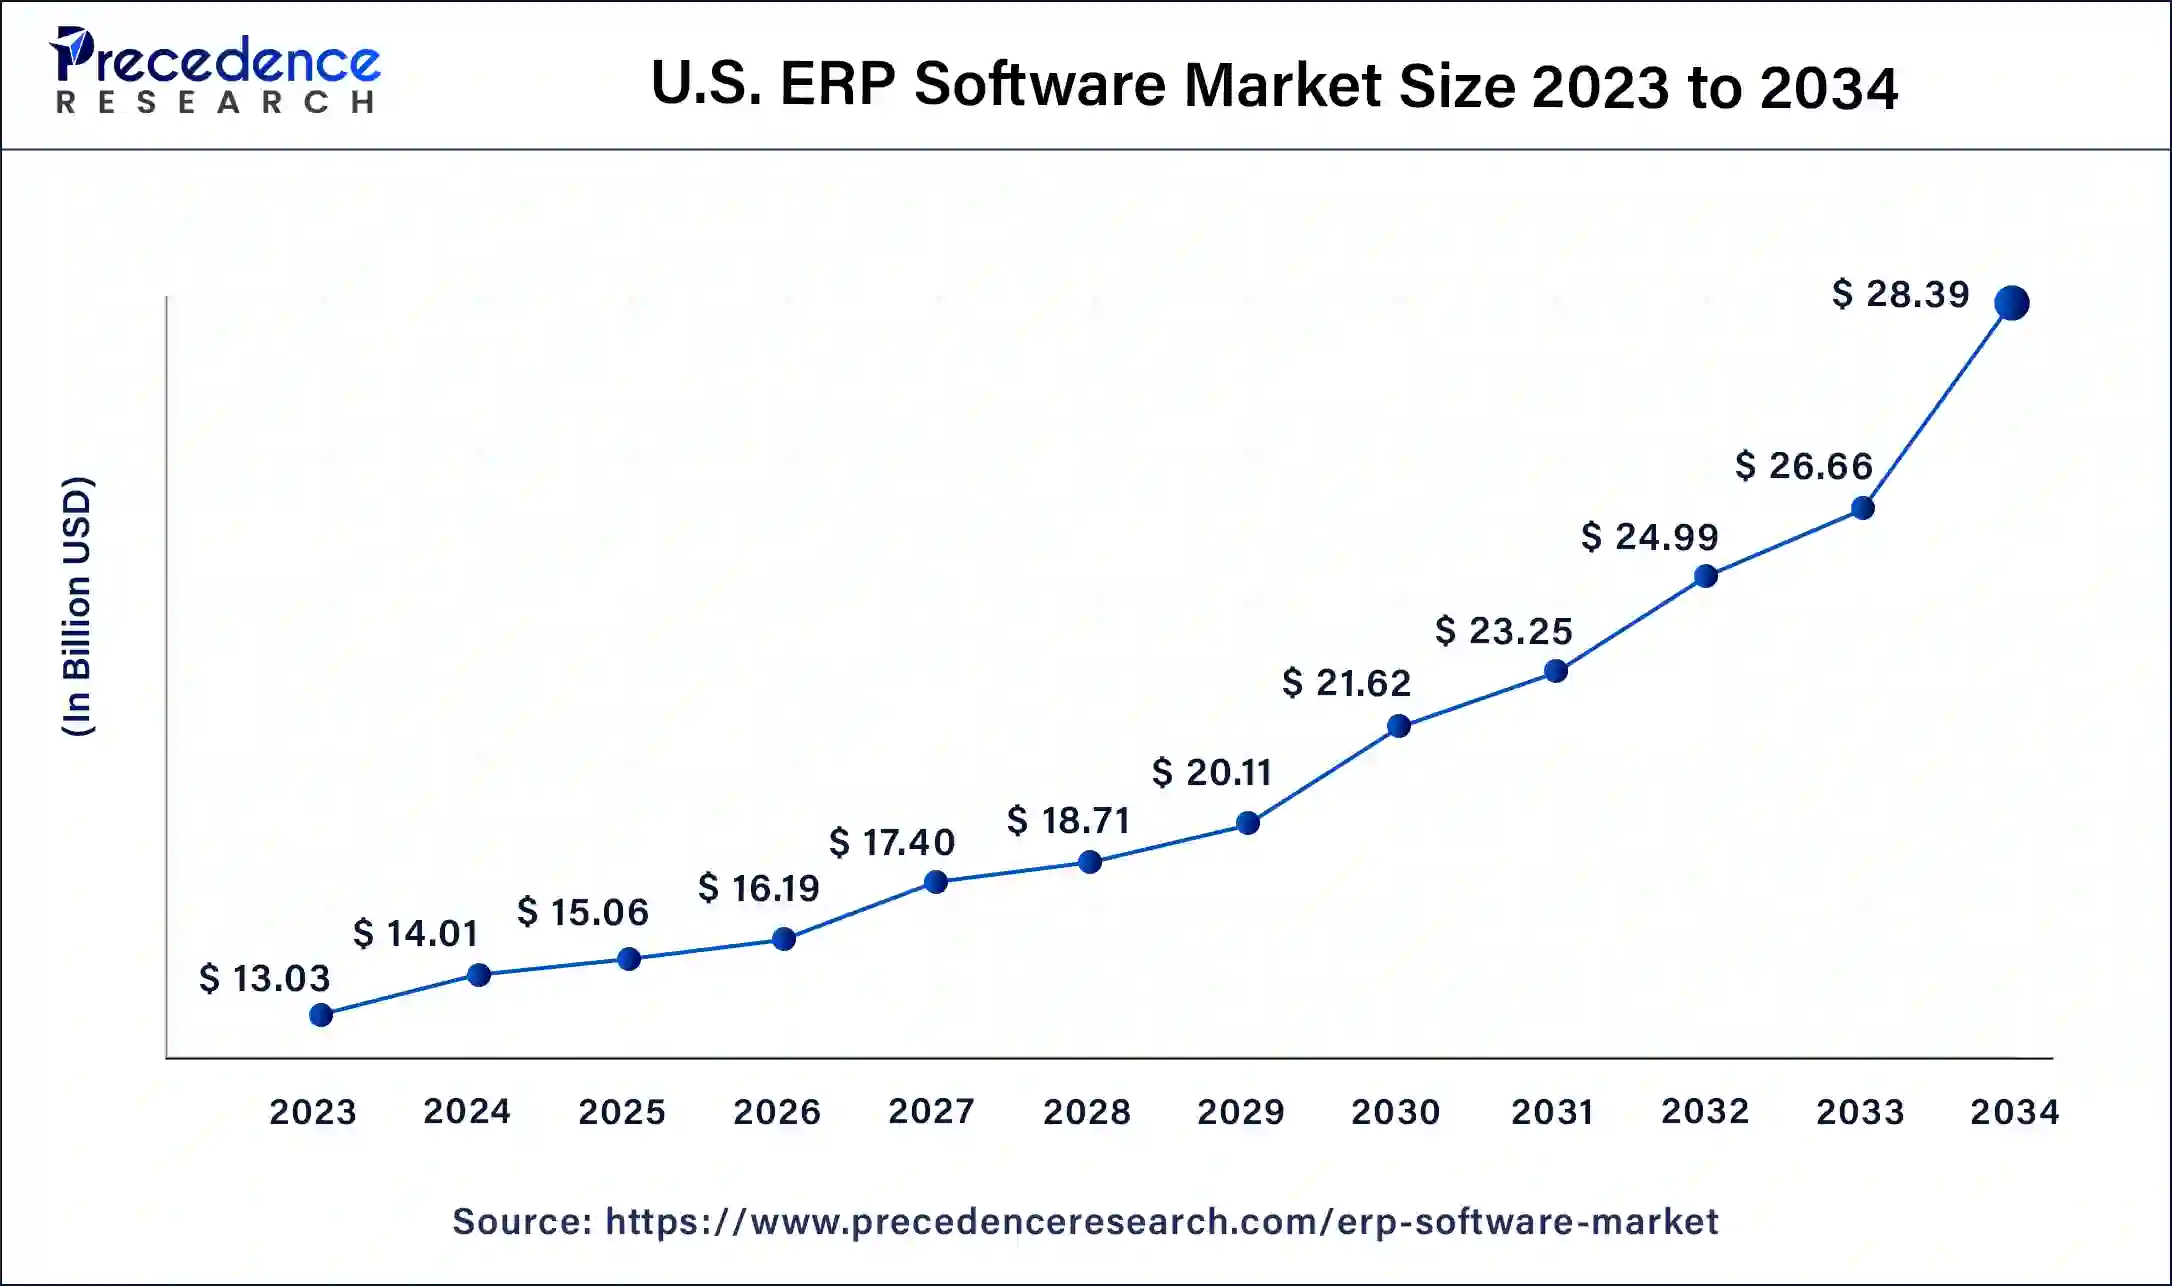 U.S. ERP Software Market Size 2024 to 2034